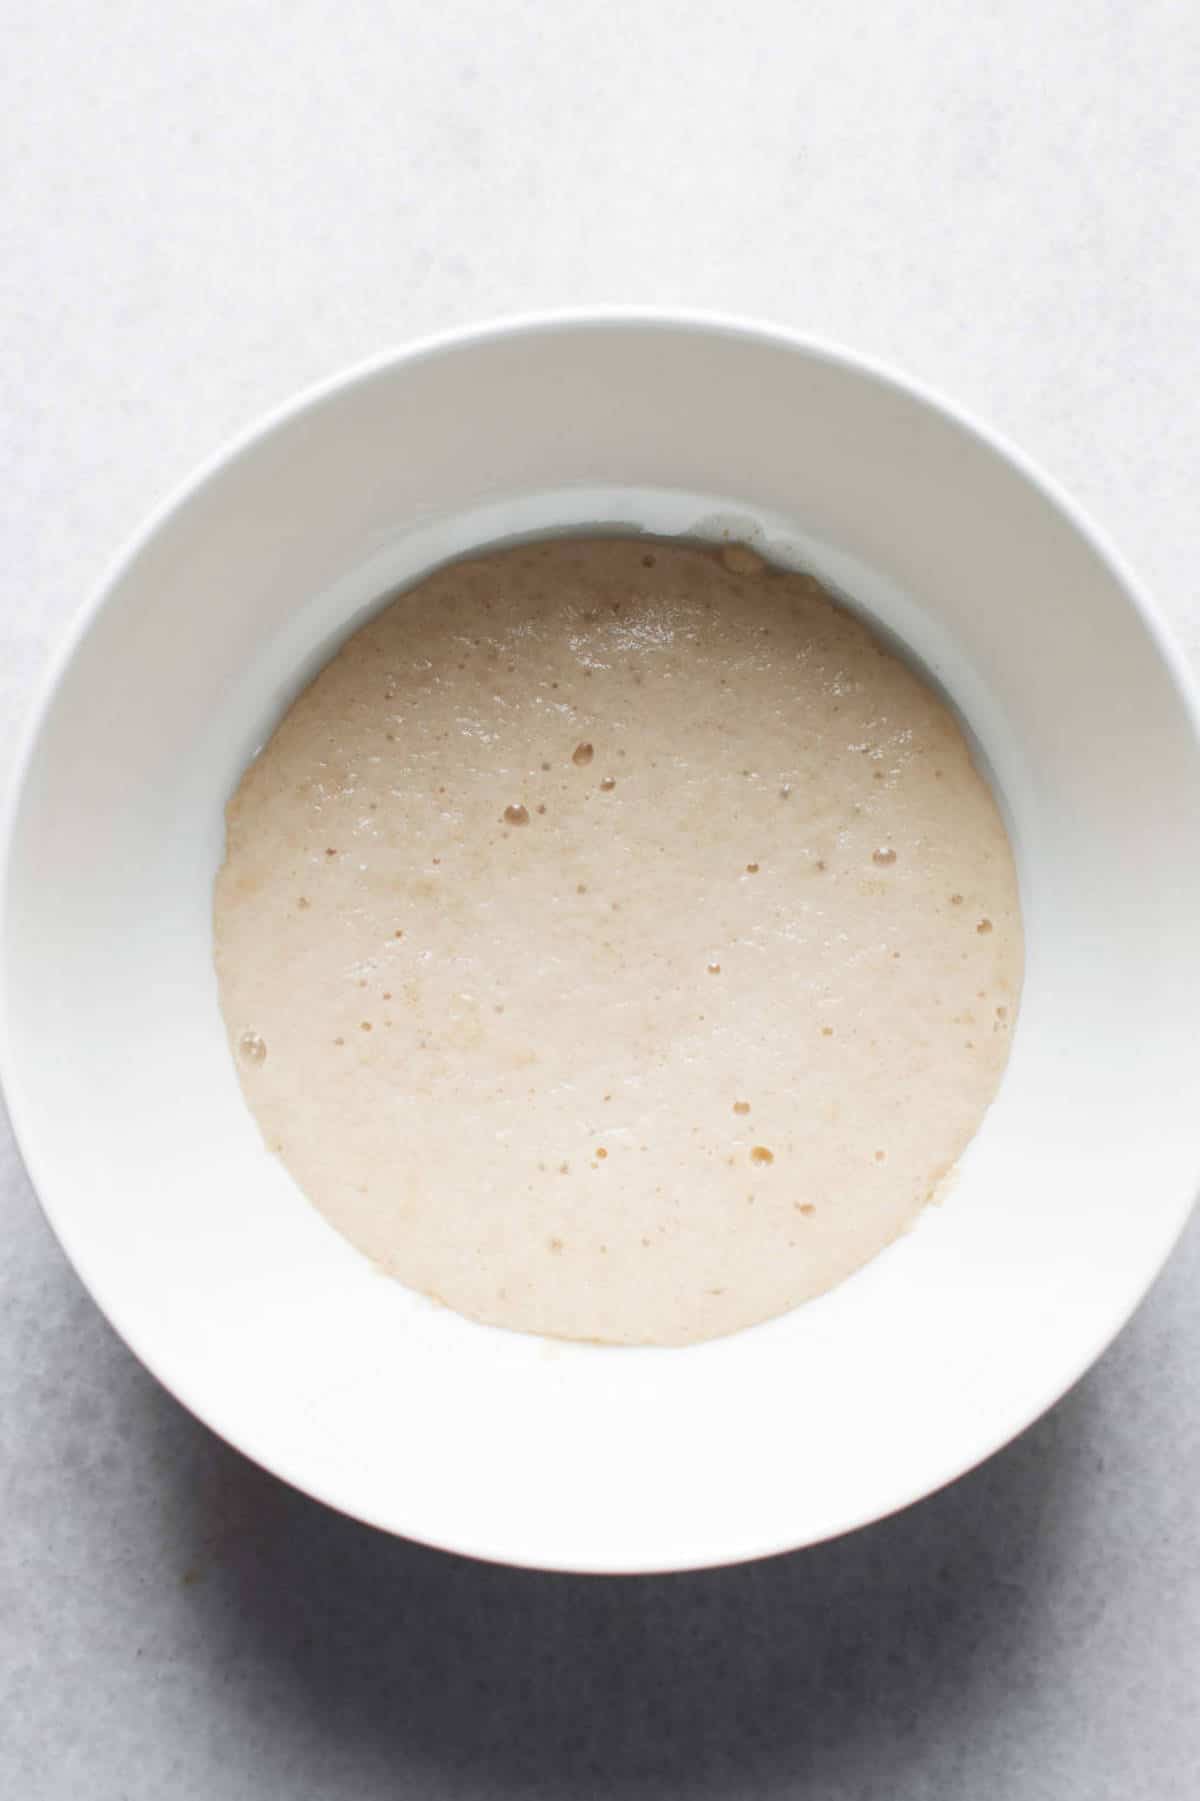 developing yeast sponge in a bowl.